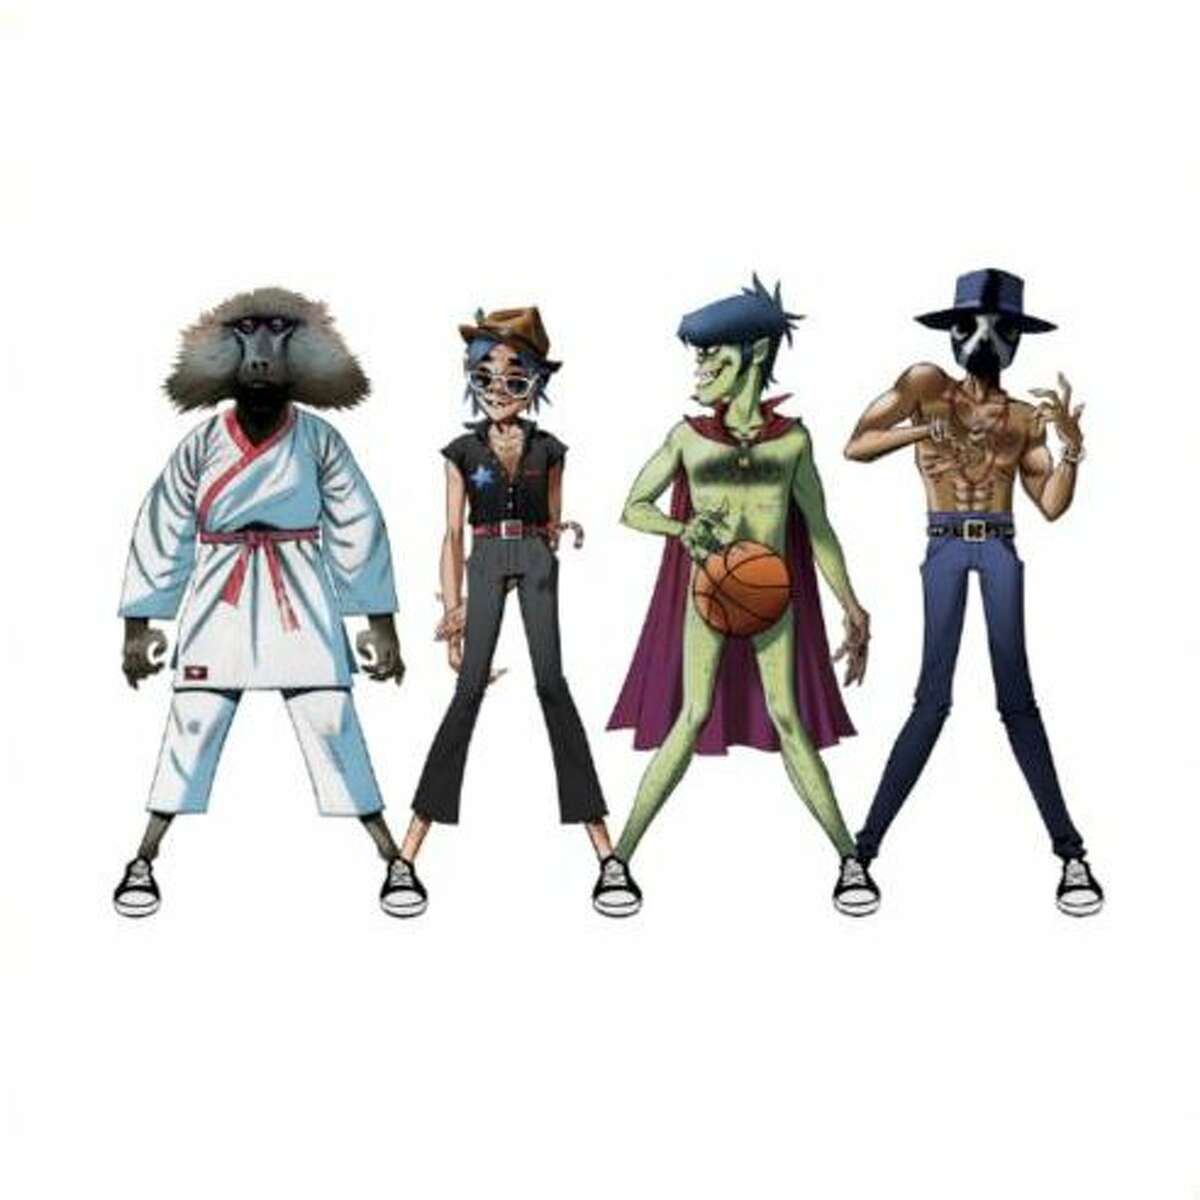 "DoYaThing" by Gorillaz featuring André 3000 and James Murphy    